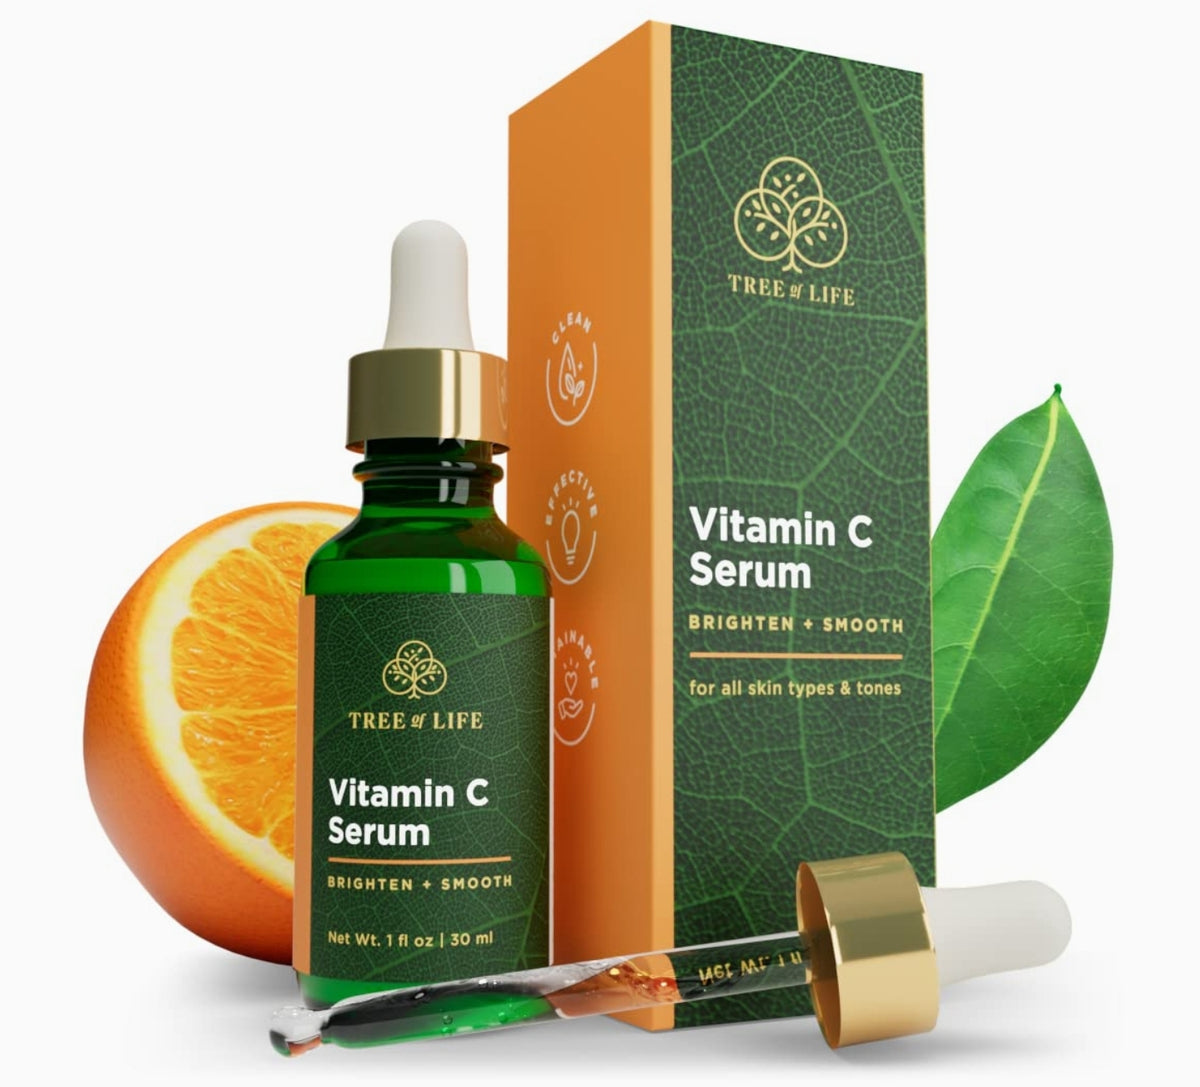 Tree of Life Facial Serum for Face, Brightening, Firming, Hydrating, Dry Skin, Dermatologist Tested - Vitamin C, 1 Fl Oz